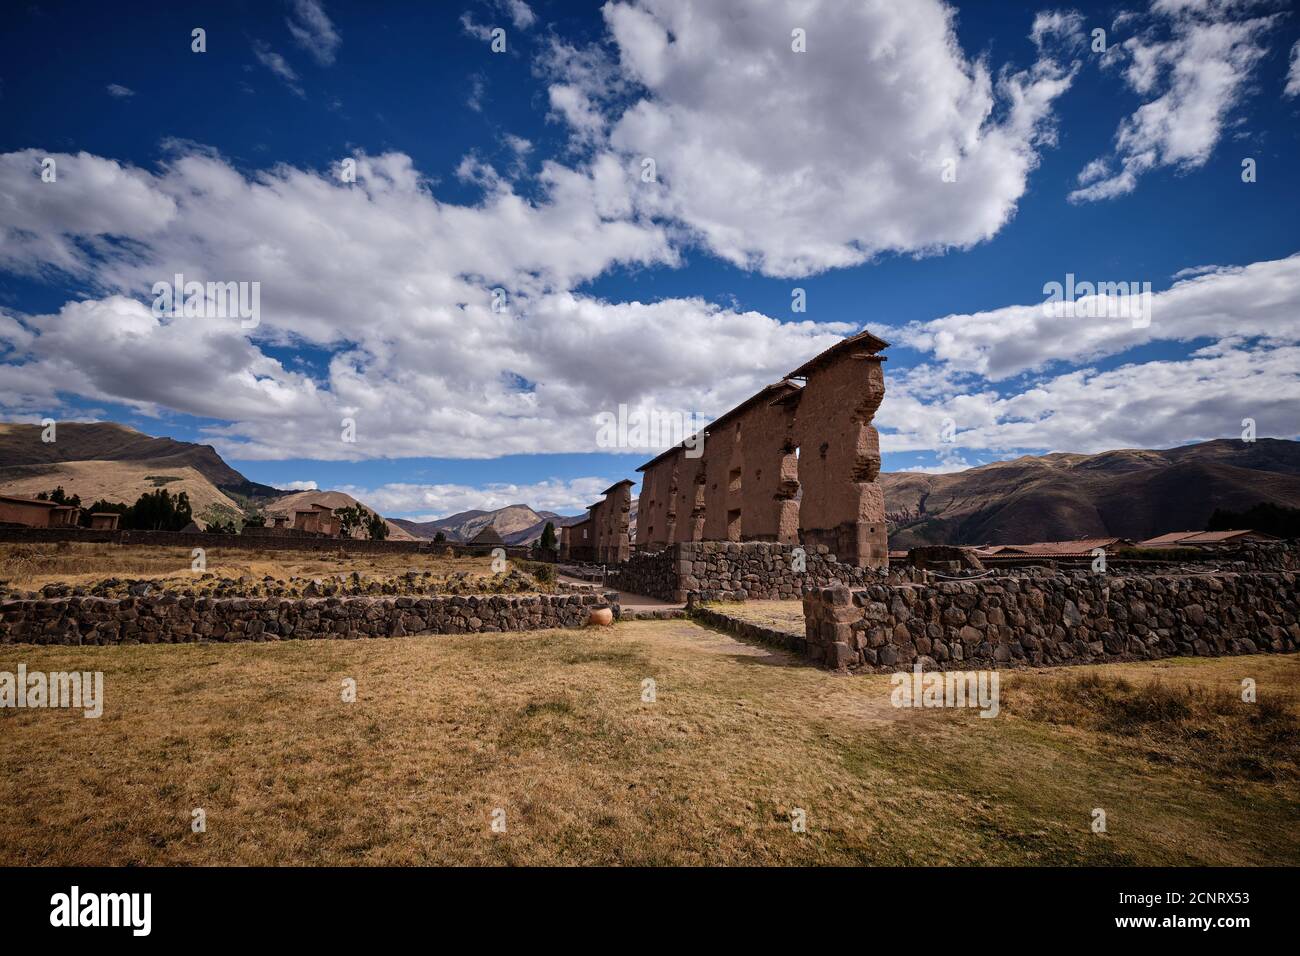 The Temple of Wiracocha at the Raqch'i Incan archaeological site, San Pedro District, Peru, shot against a striking blue sky with cloud Stock Photo